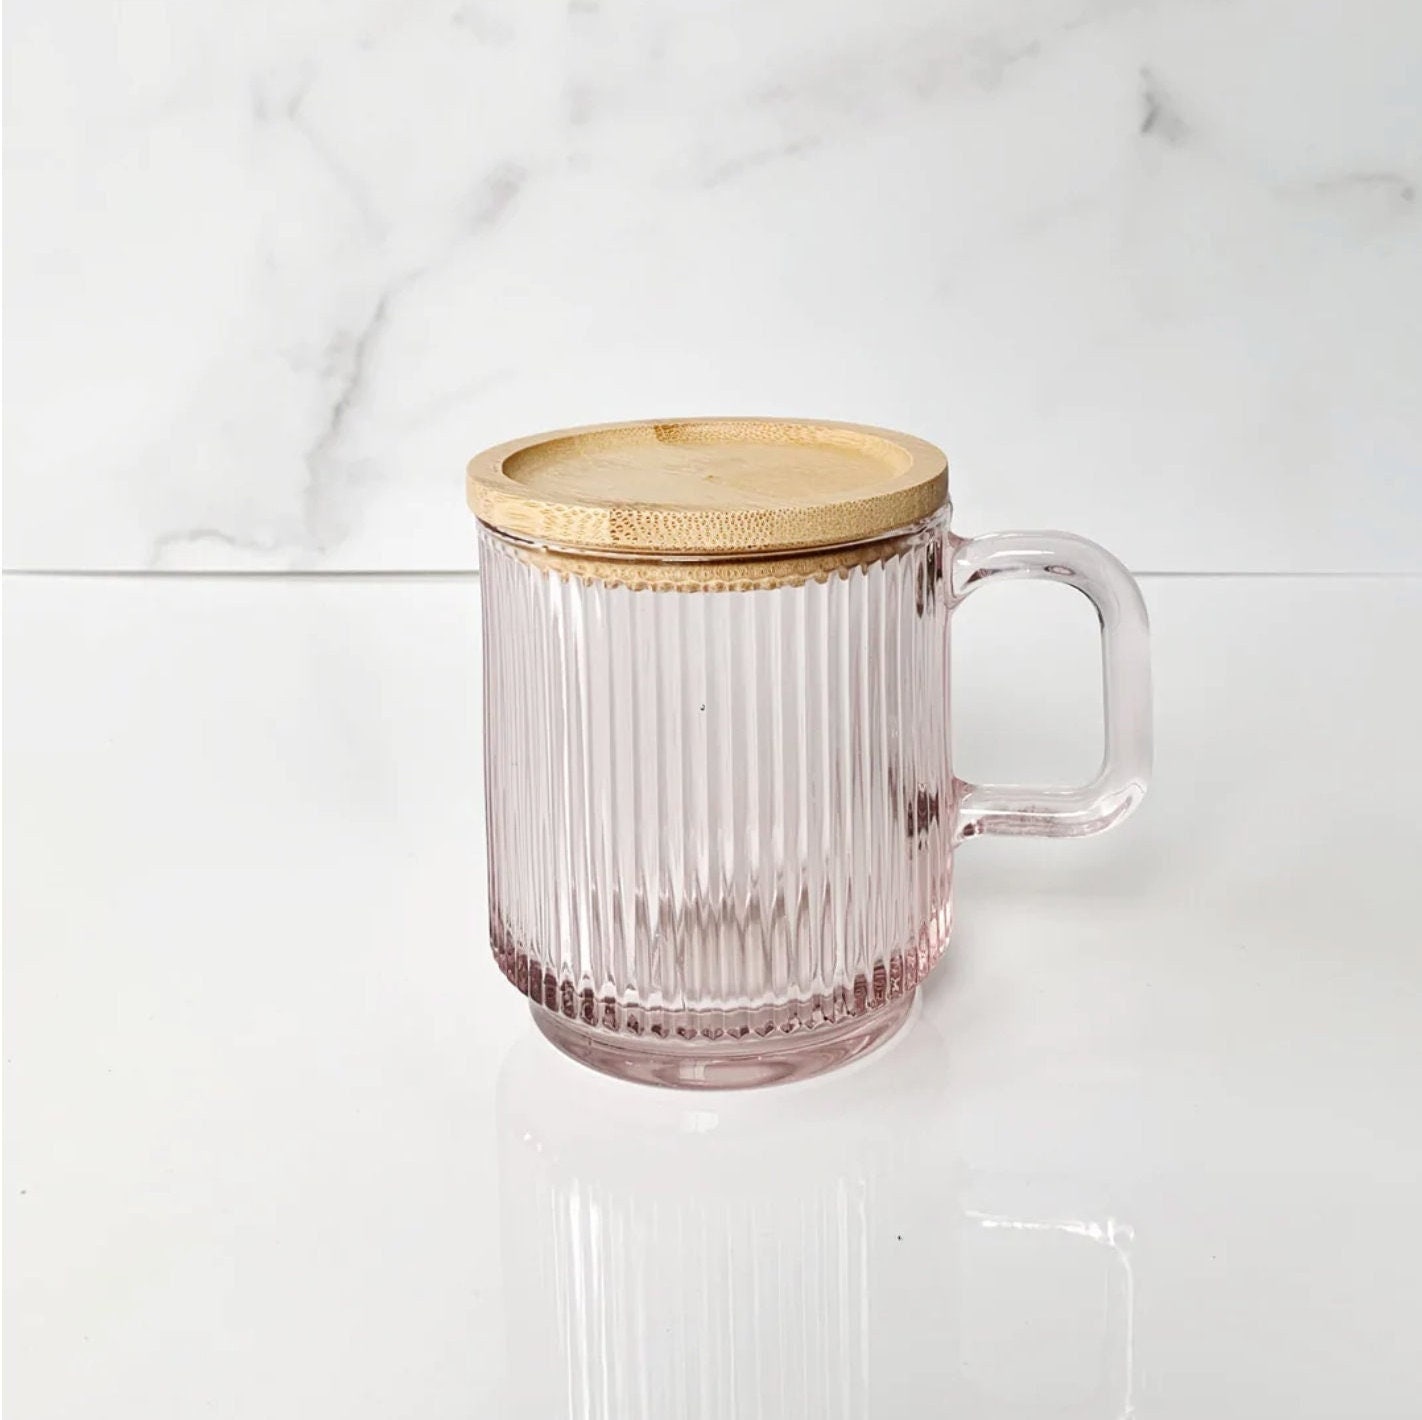 2 Pieces Clear Glass Coffee Mugs with Glass Lids Vintage Vertical Stripes  Tea Mug Classic Ribbed Gla…See more 2 Pieces Clear Glass Coffee Mugs with